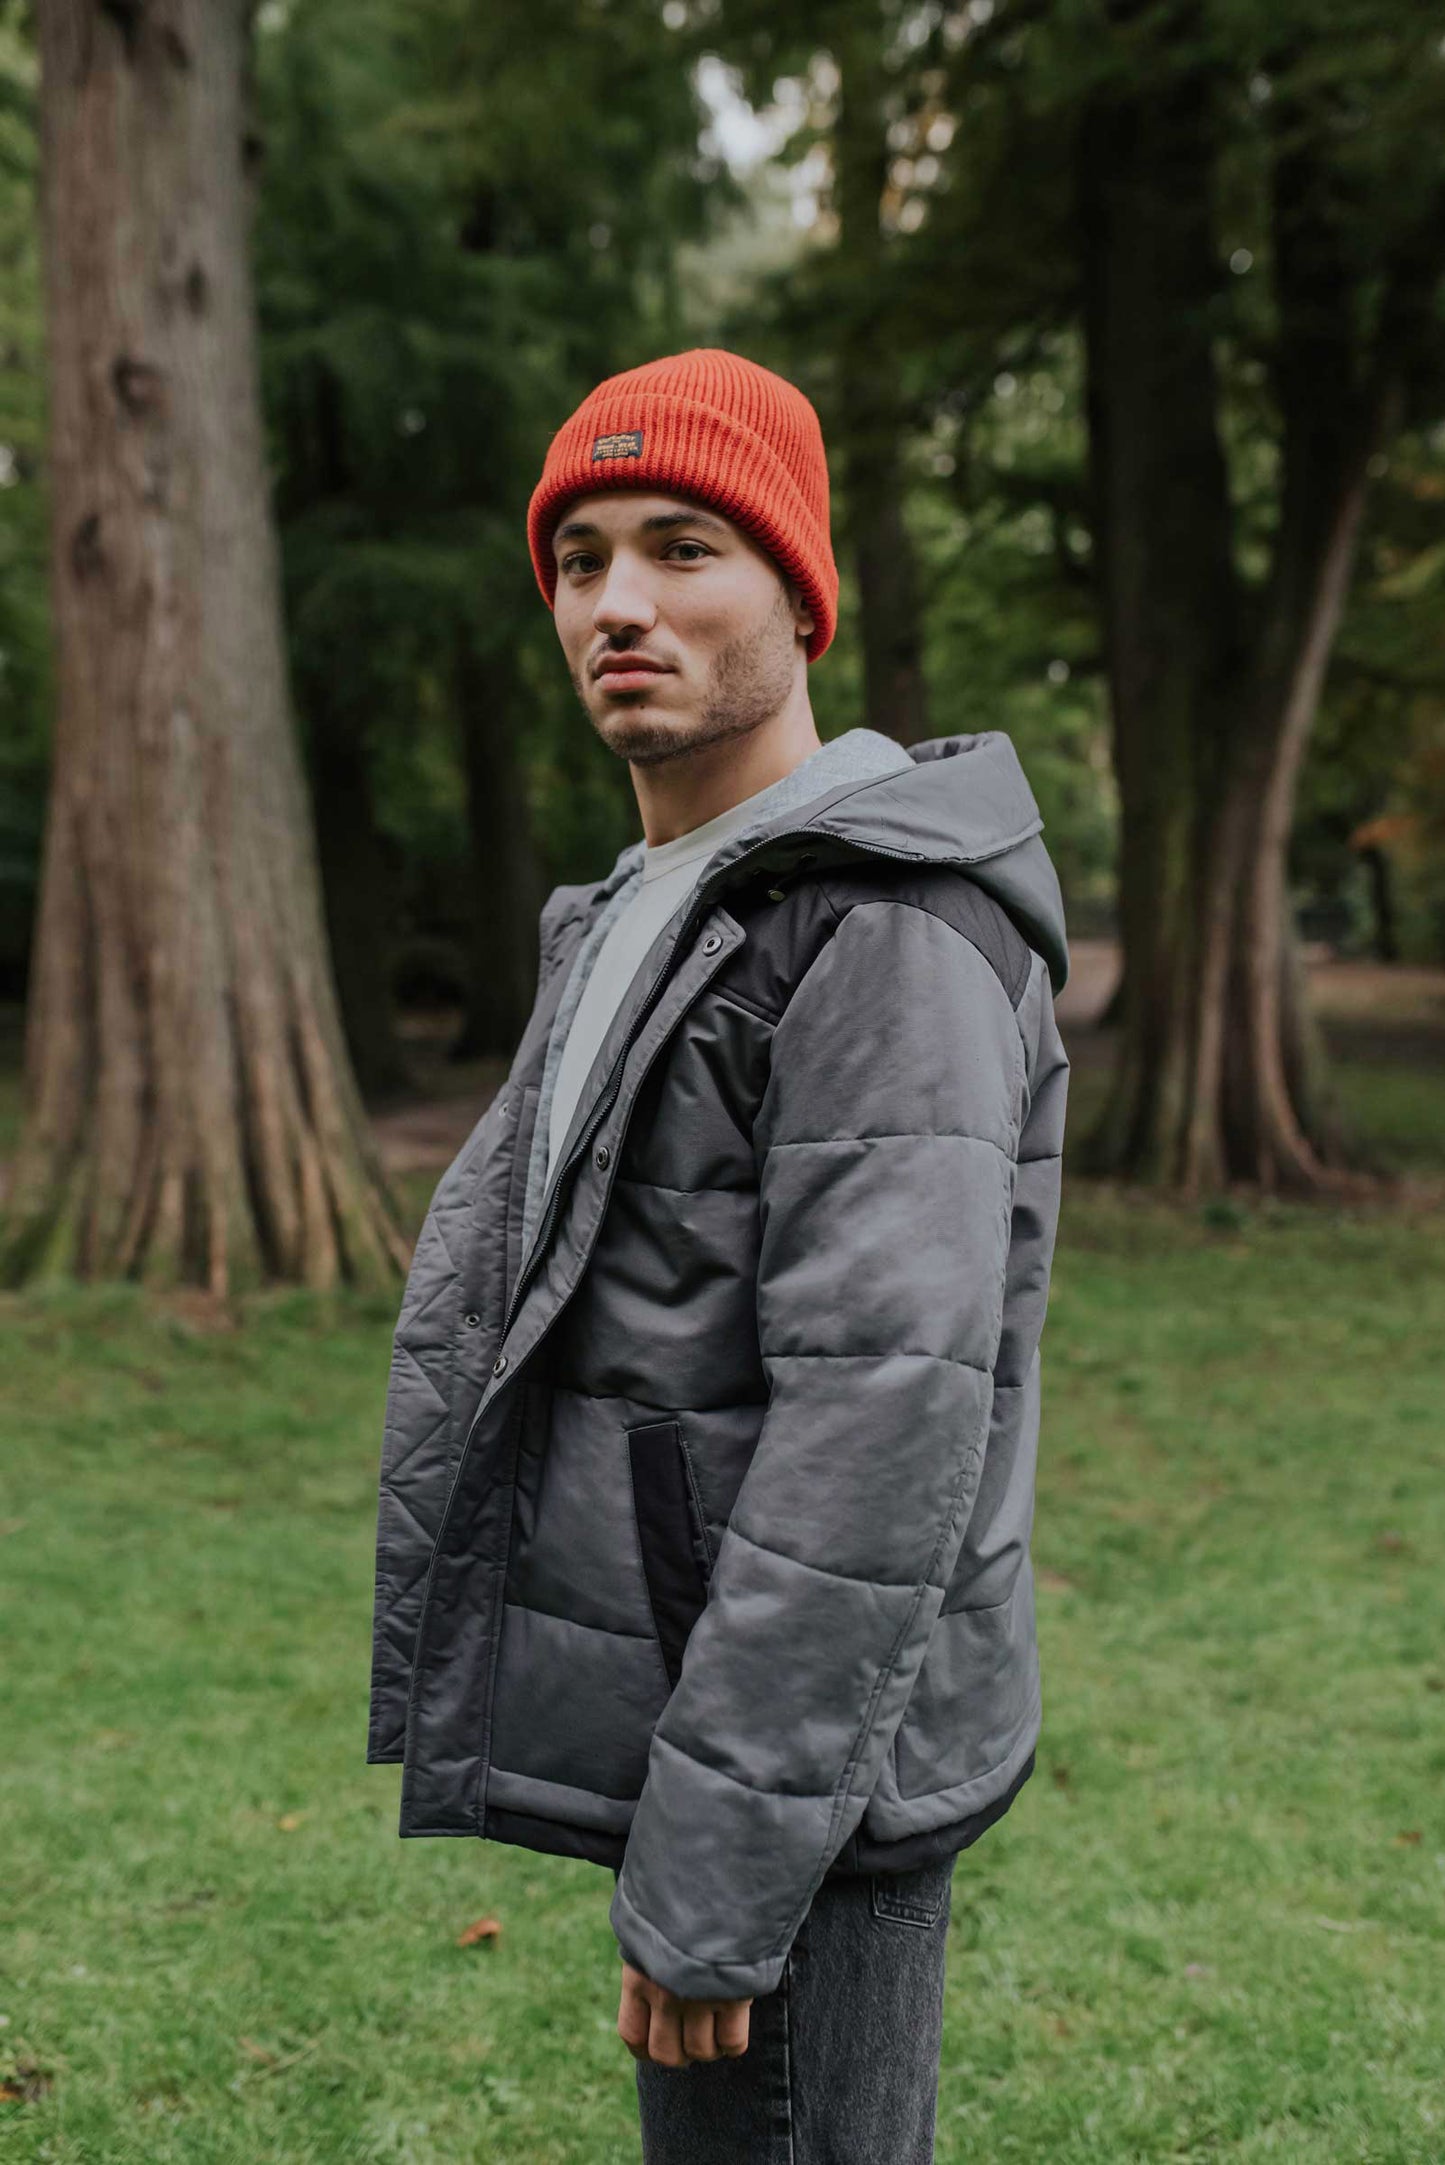 All weather proof sustainable hemp winter jacket, with an adjustable hood, ribbed knit cuffs with thumbholes and zipper windguard to keep the elements out. The soft vegan padding is made from 100% certified recycled plastic bottles, by the innovative Repreve® - Side View